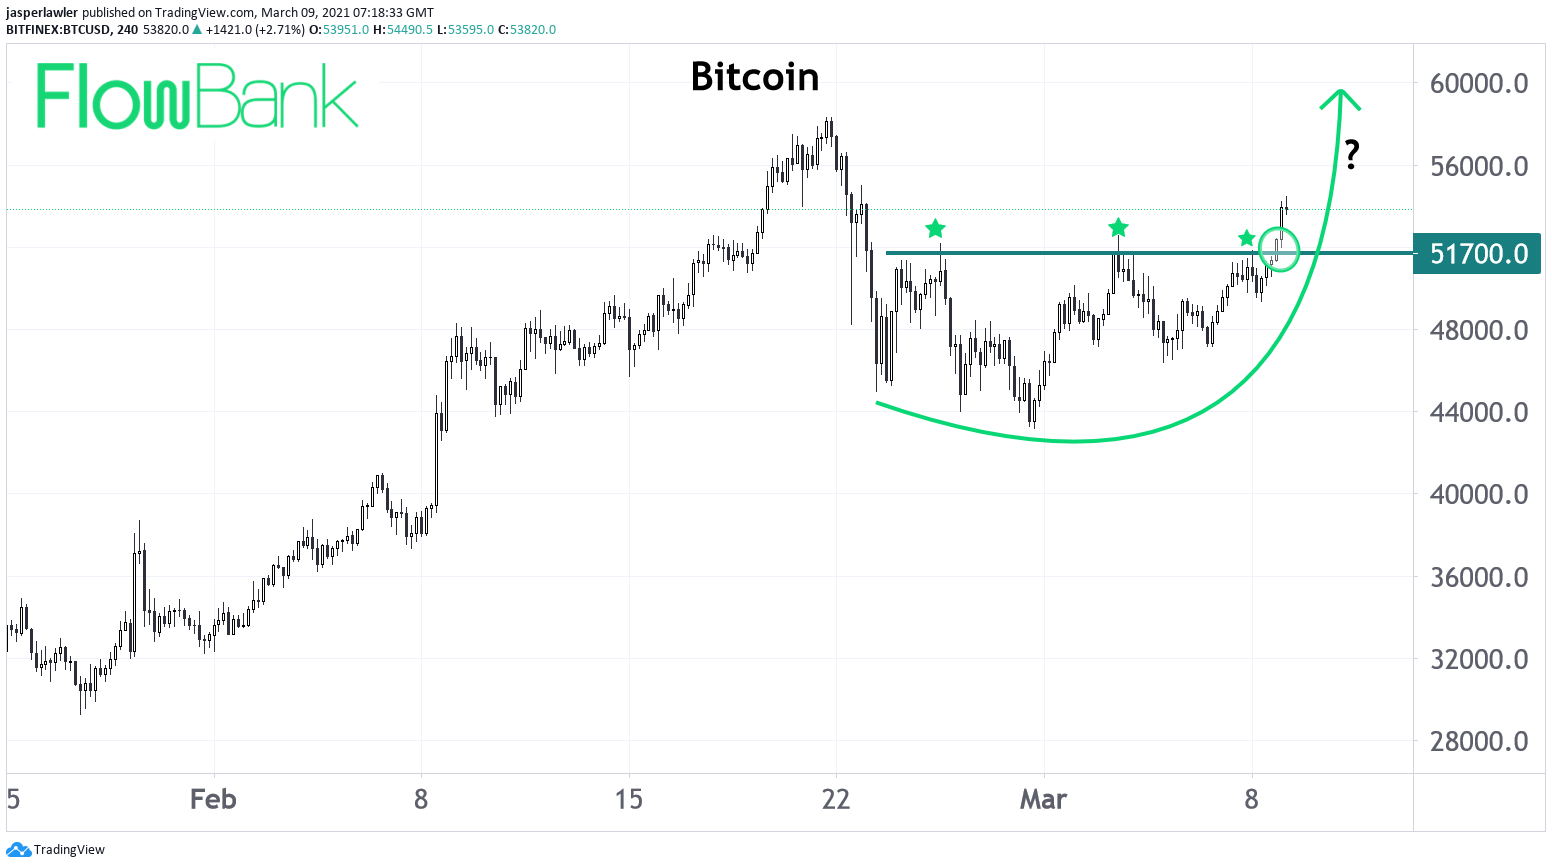 Bitcoin at $54k - breaks out from 2-week consolidation - $60k coming soon?